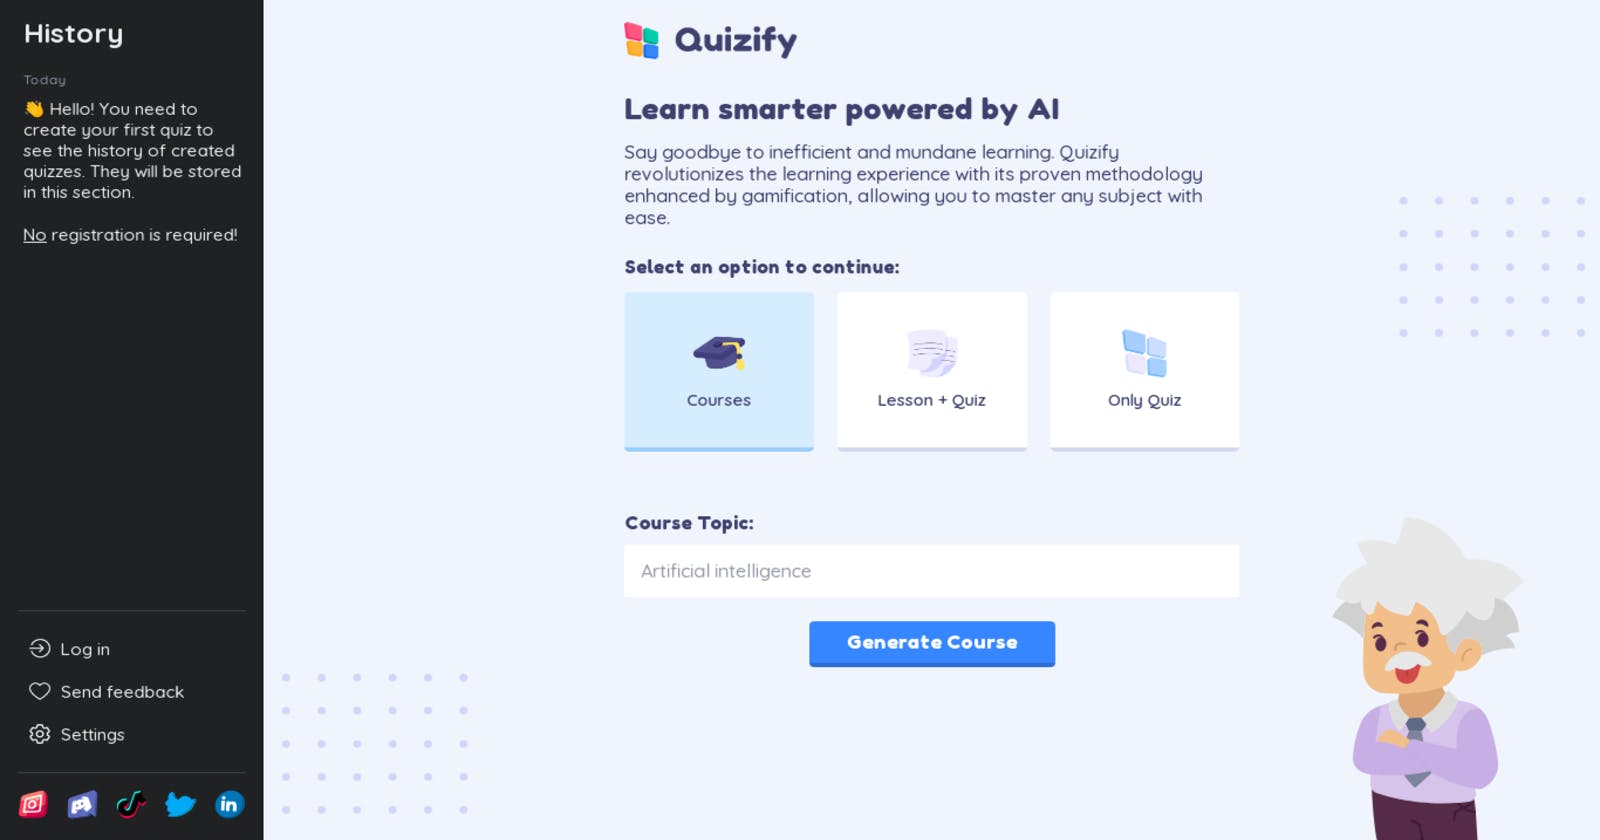 Quizify - Create Amazing Quizzes 20X Faster with AI